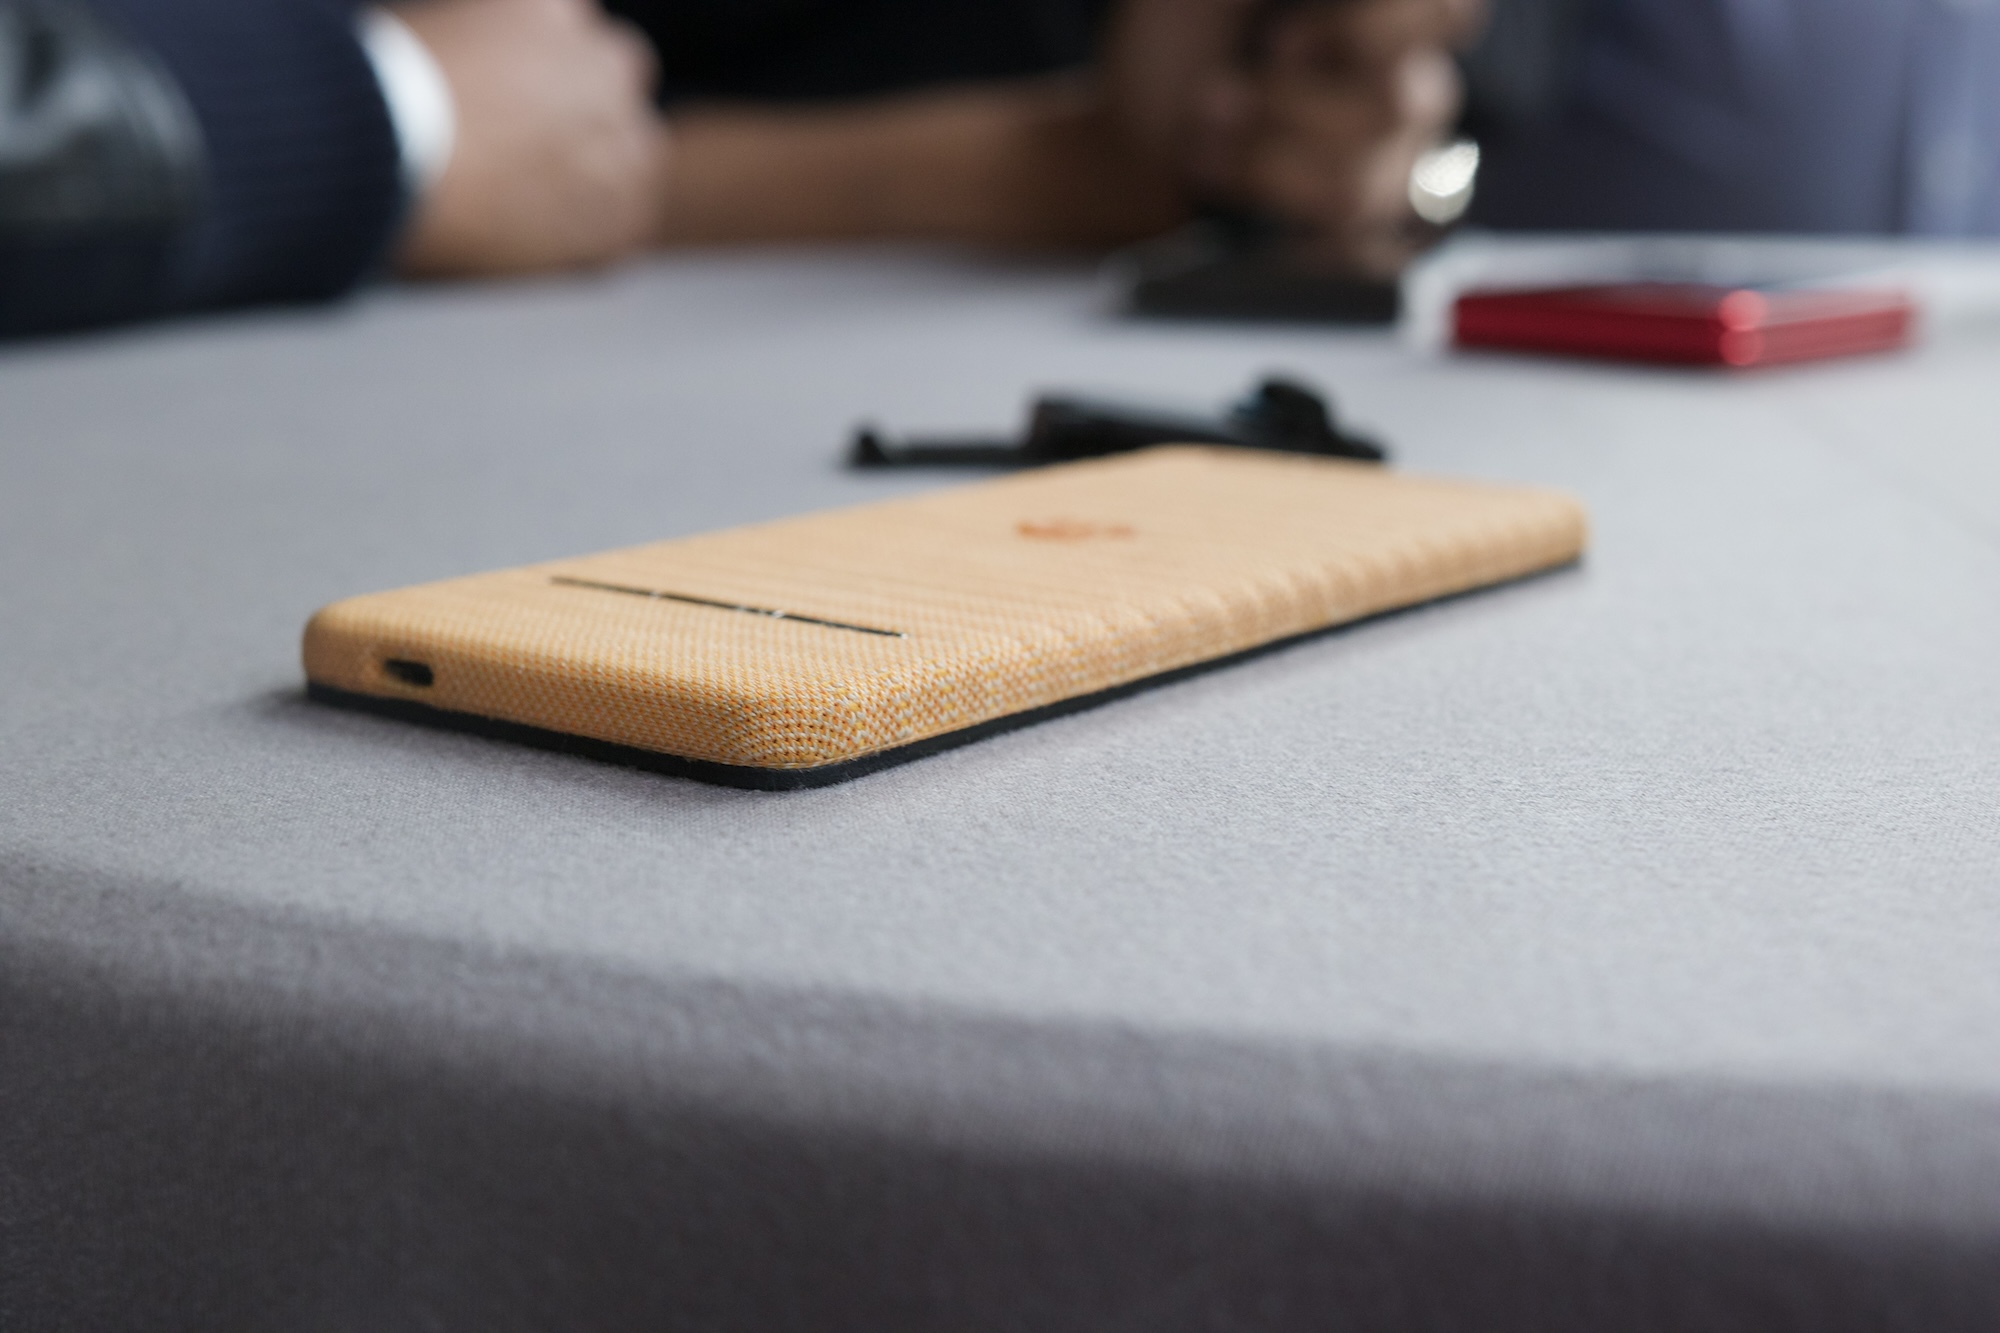 Motorola’s concept phone laying face-down on a table.